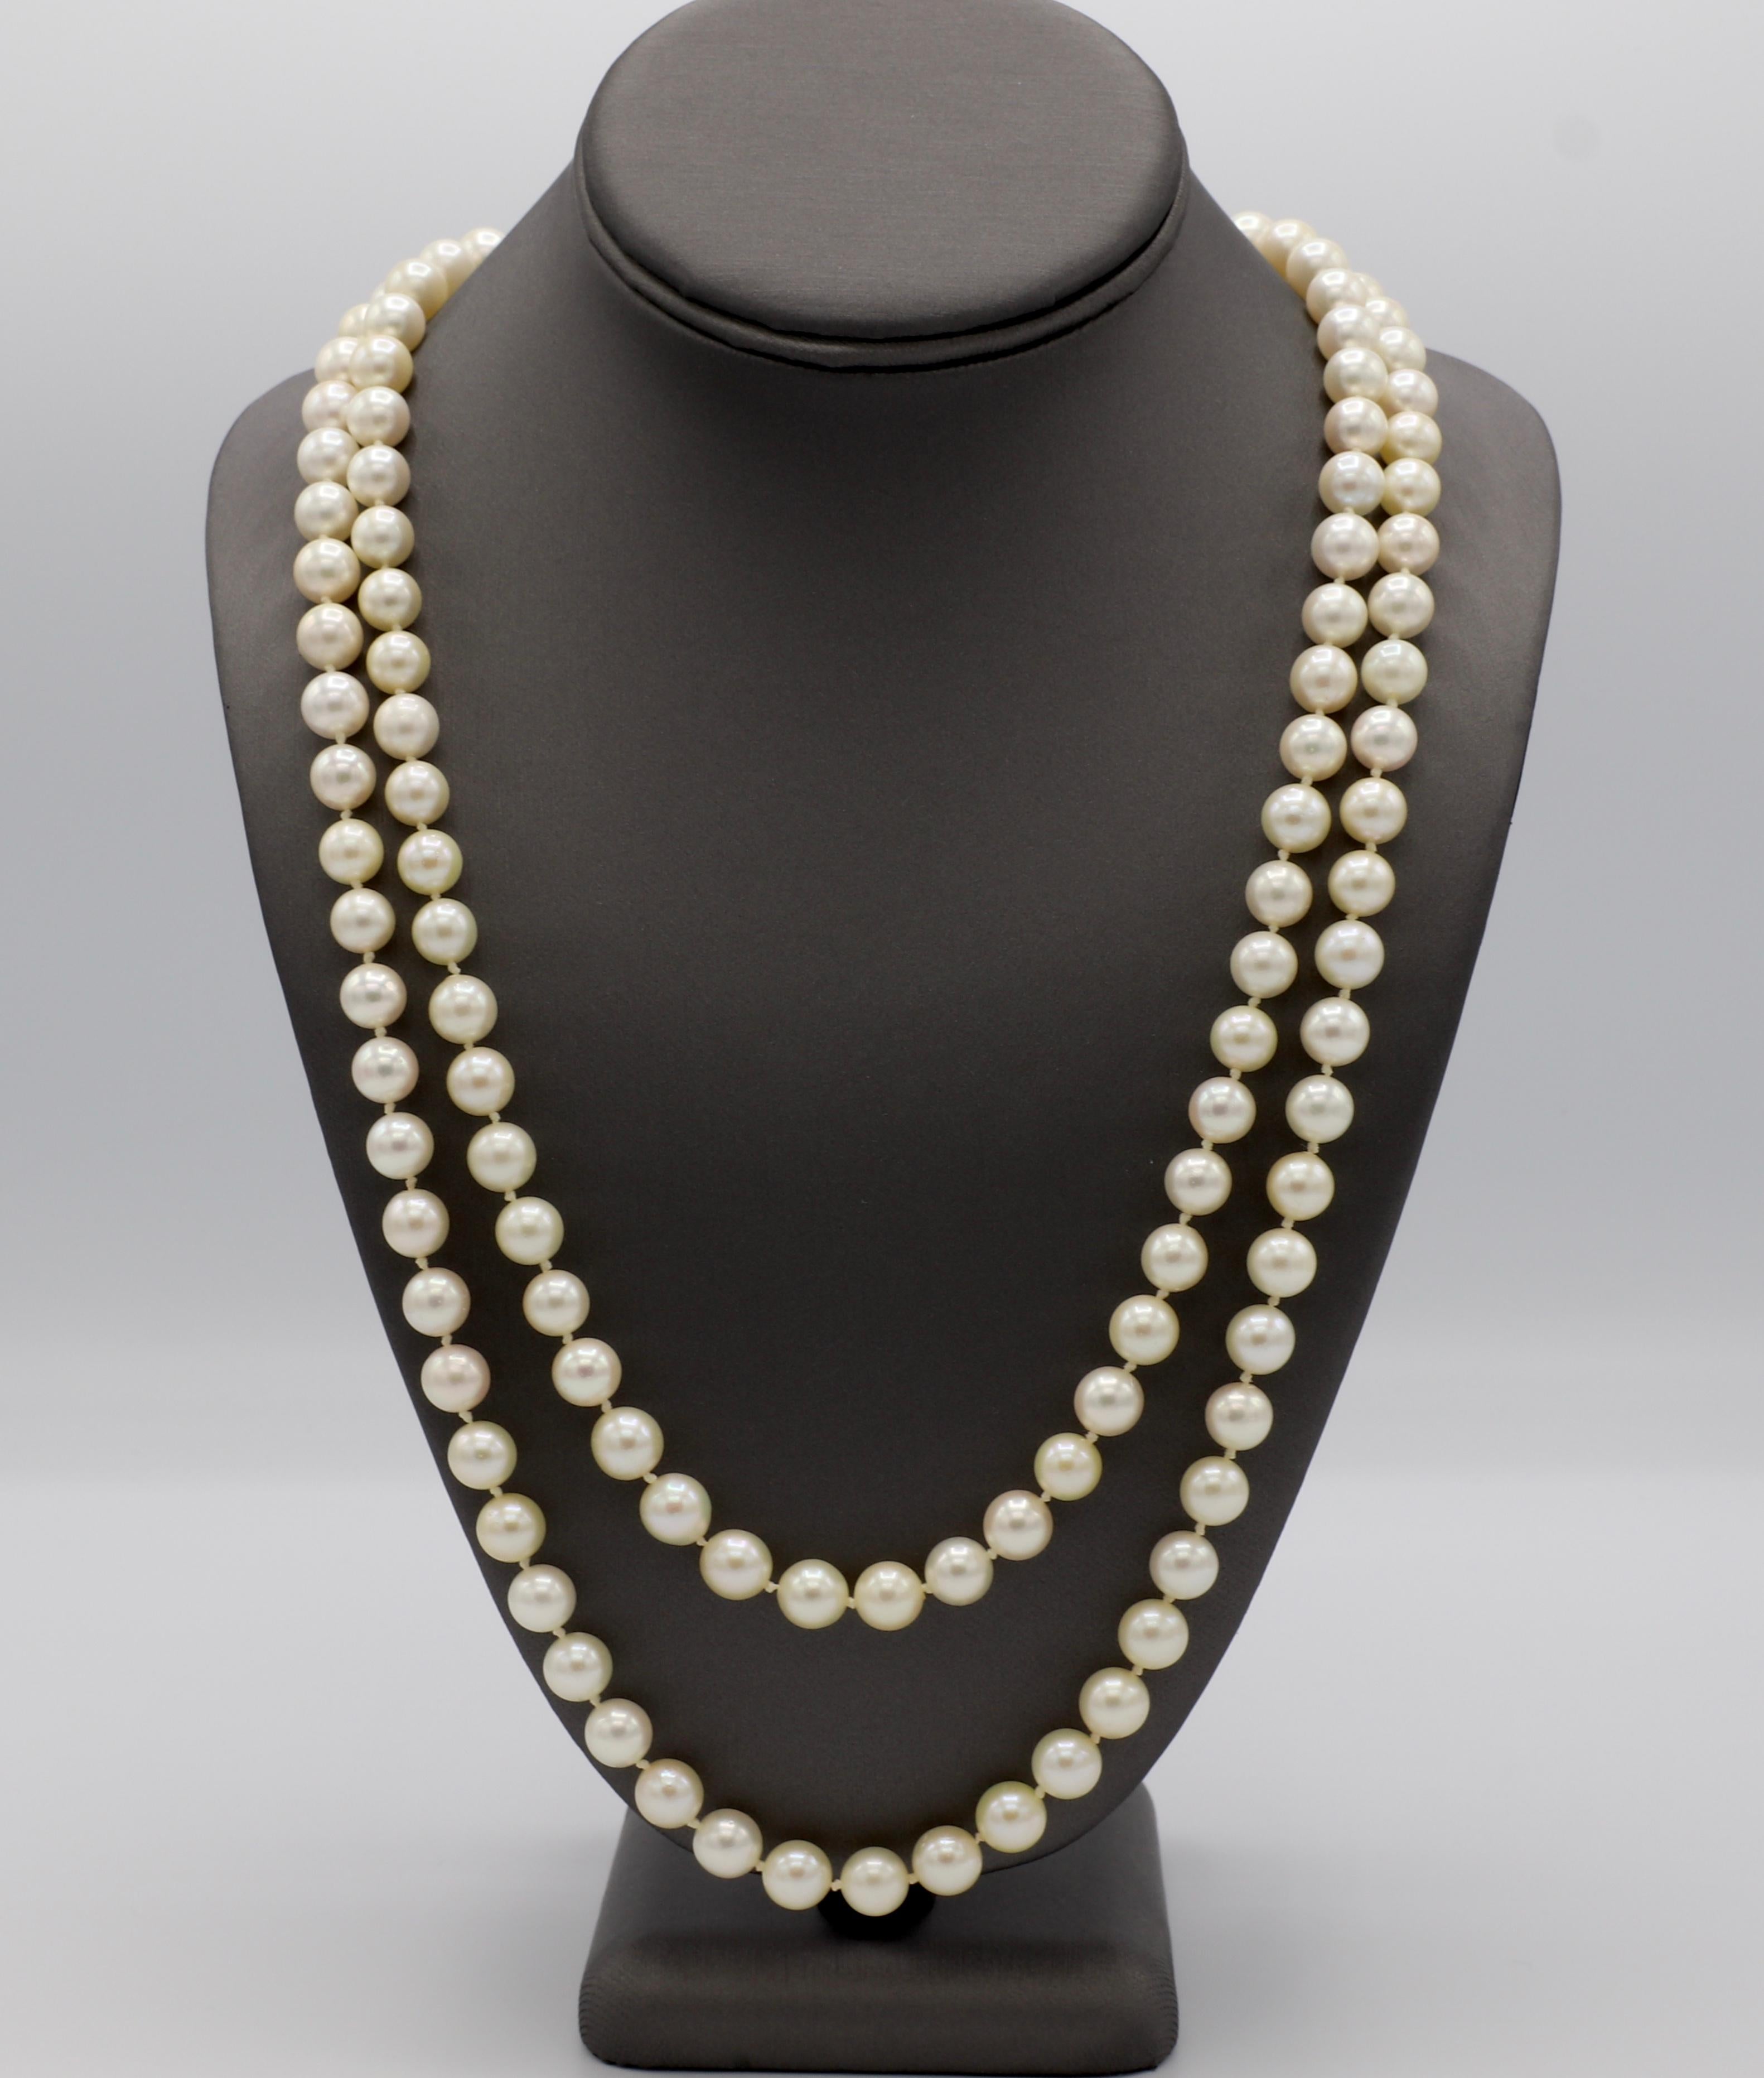 Old European Cut Diamond Akoya Double Strand Opra Length Pearl Necklace with Diamond Clasp 

Pearls: 8.3 - 9.2mm, warm creamy hue, high luster and evenly matched 
Length: 32 inches 
Clasp: 14k white gold
Diamonds: Approx. .65 carat old European cut